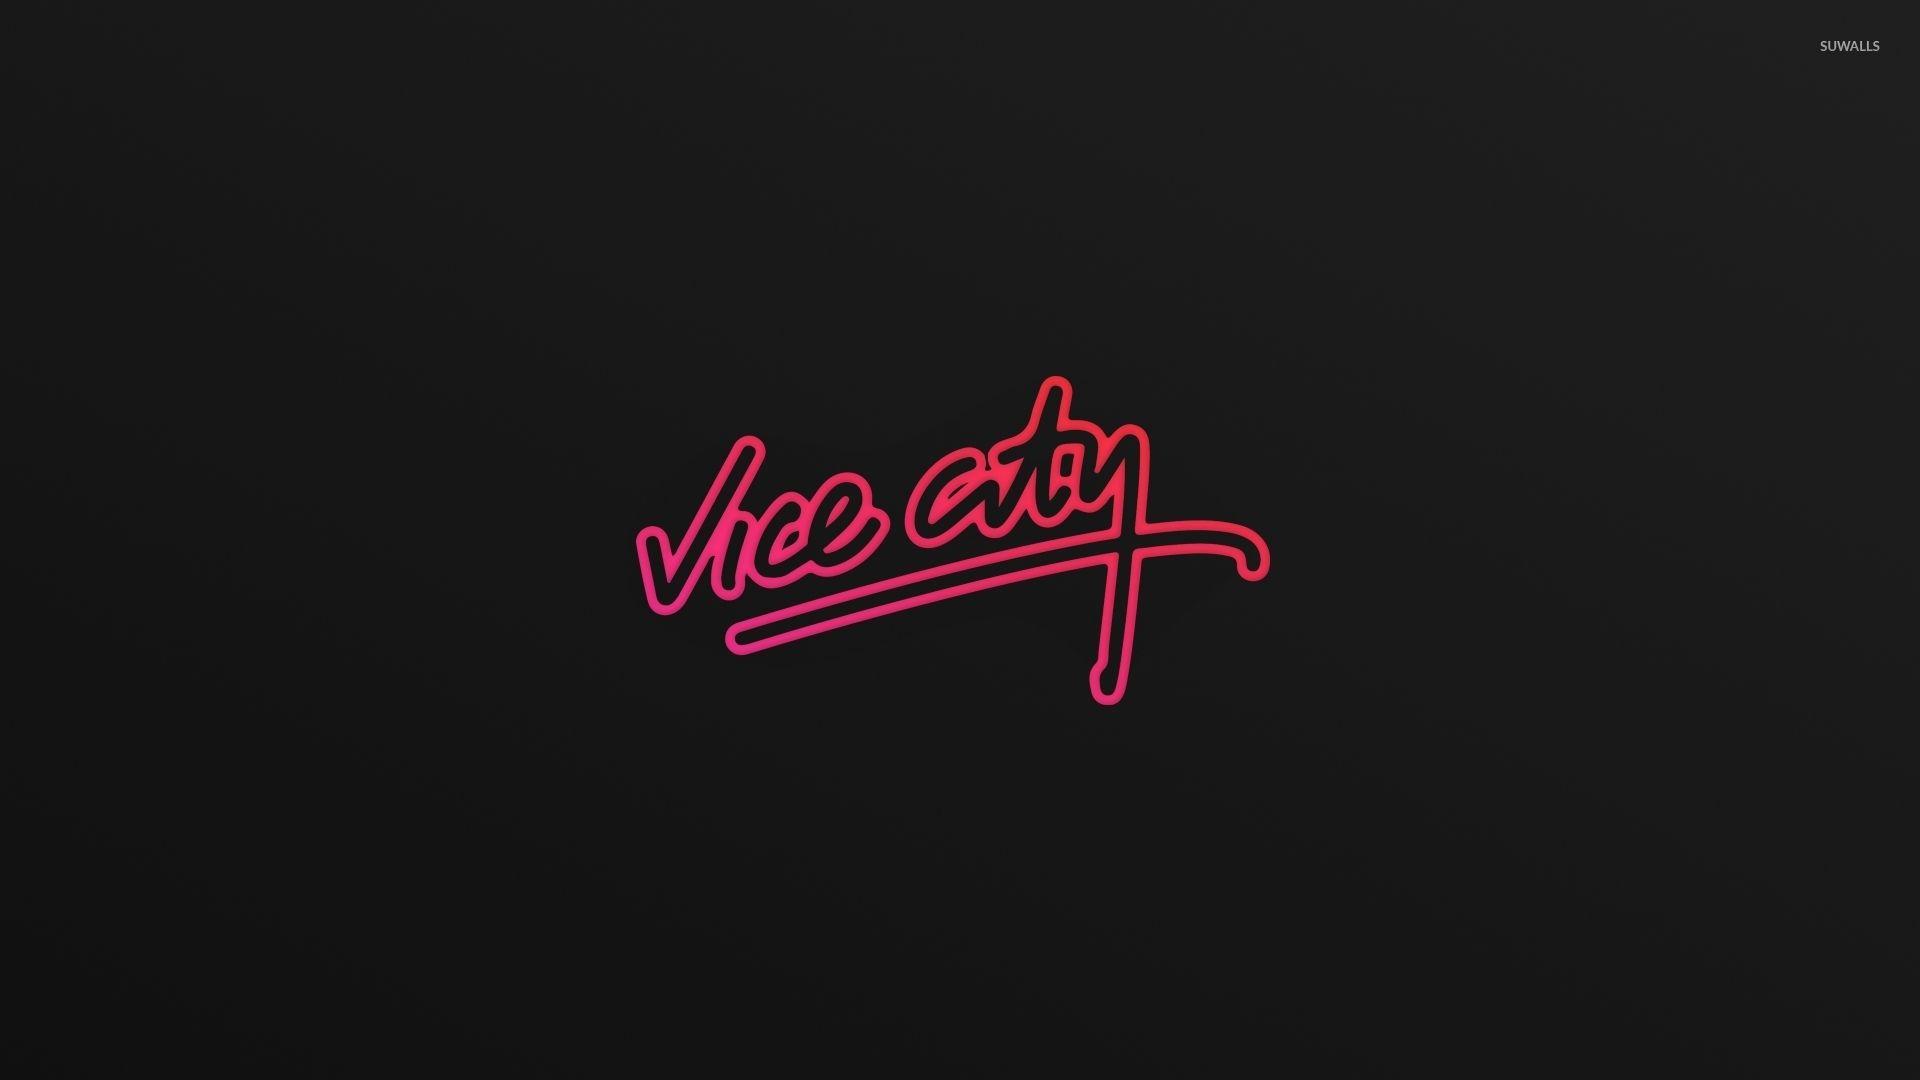 Grand Theft Auto Vice City wallpapers